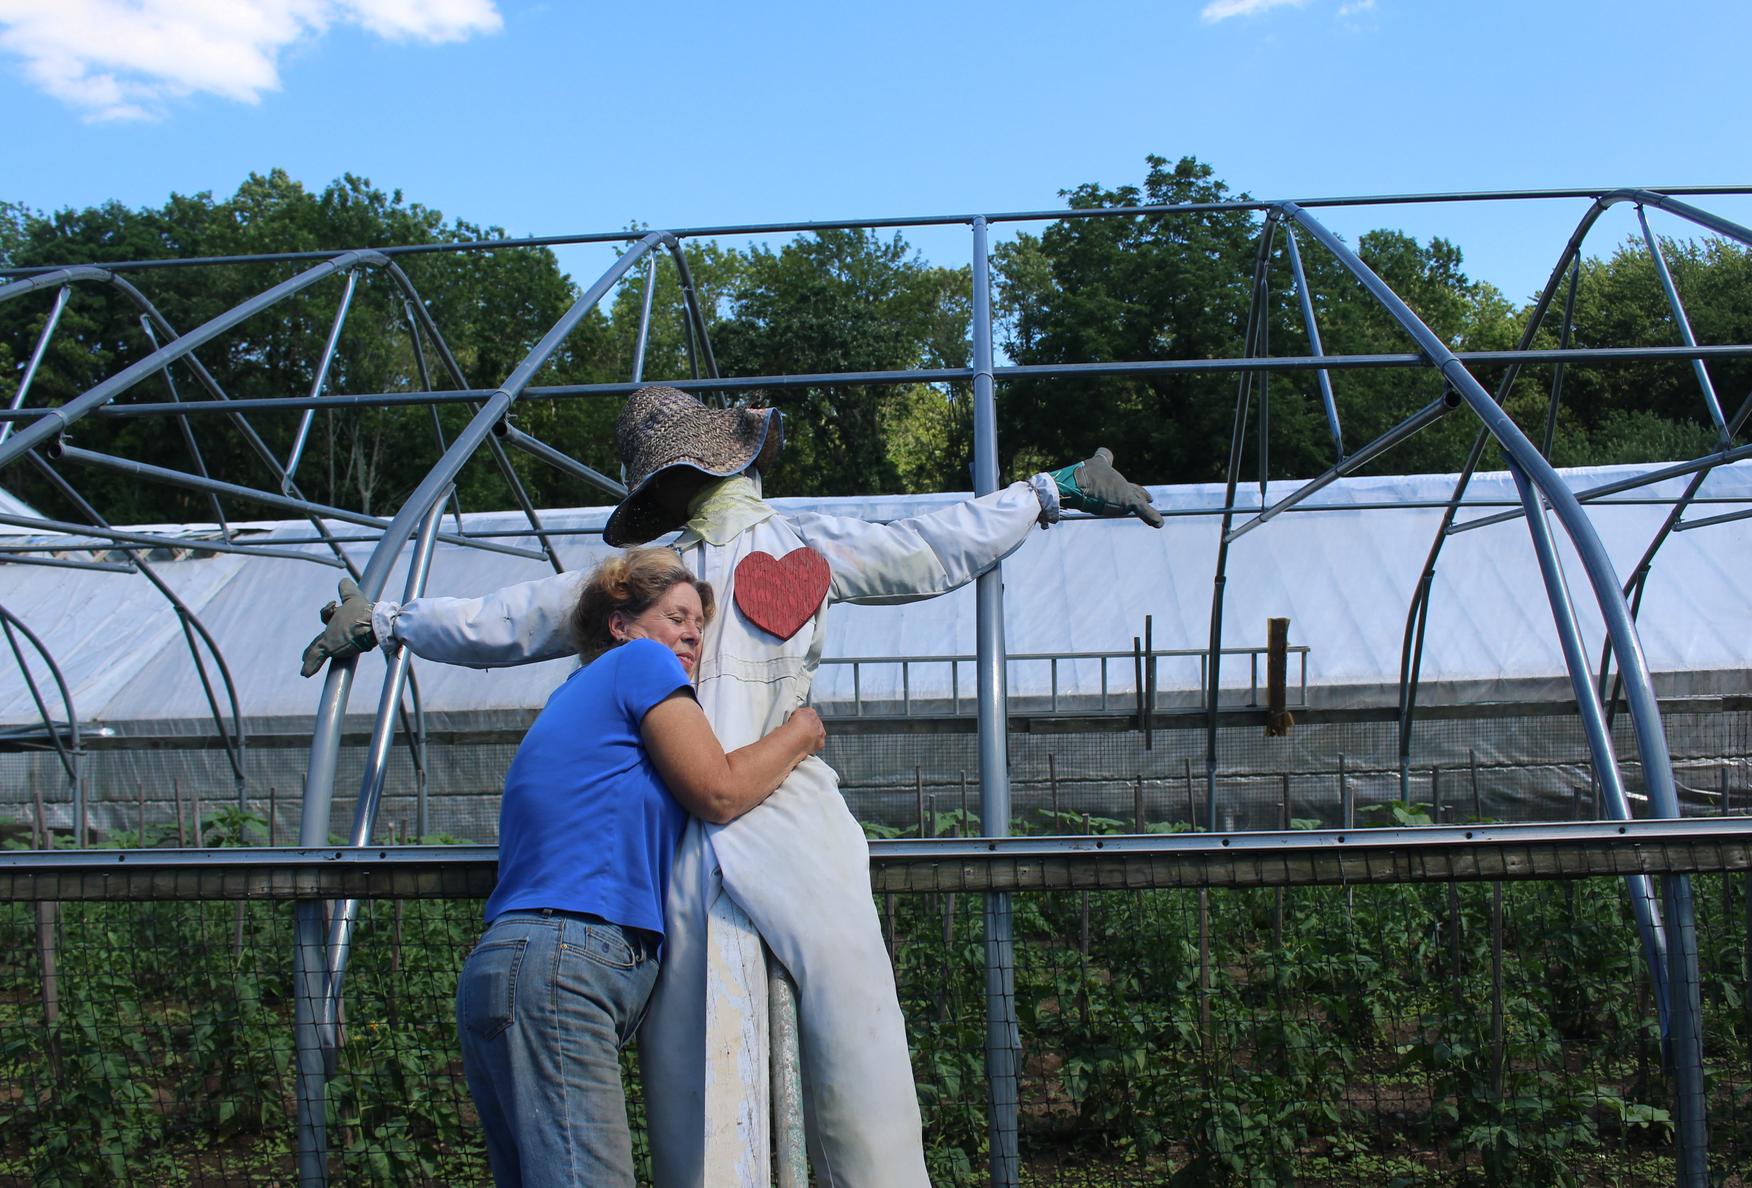 At the end of a long day at the farm stand on Sunday, Kathy Augustin gives her favorite scarecrow a hug. July 9, 2017 Photo: Leslie Yager